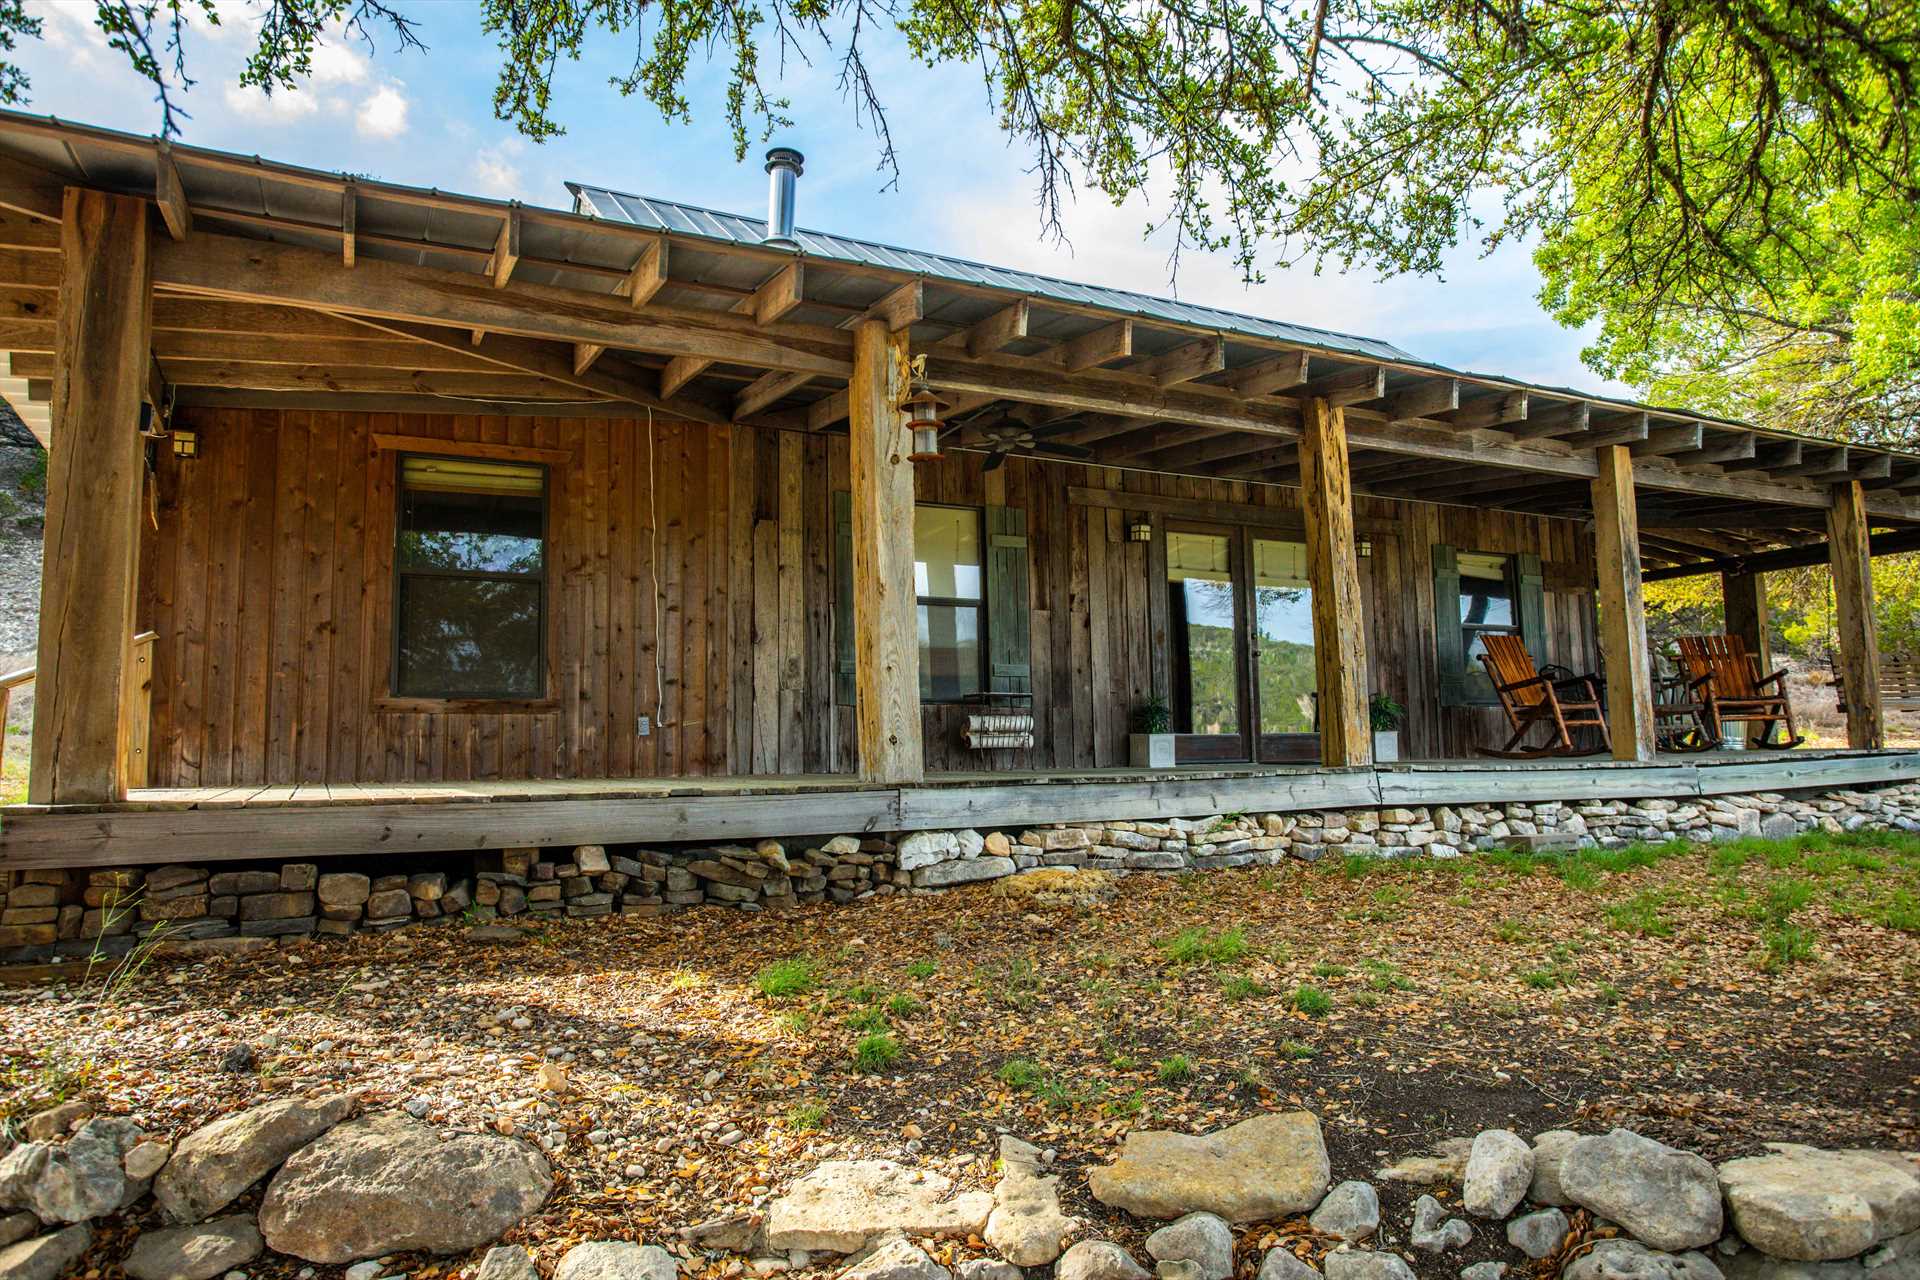                                                 The Hill Country views are awesome here, and our guests love the look of the front of the Retreat, too!